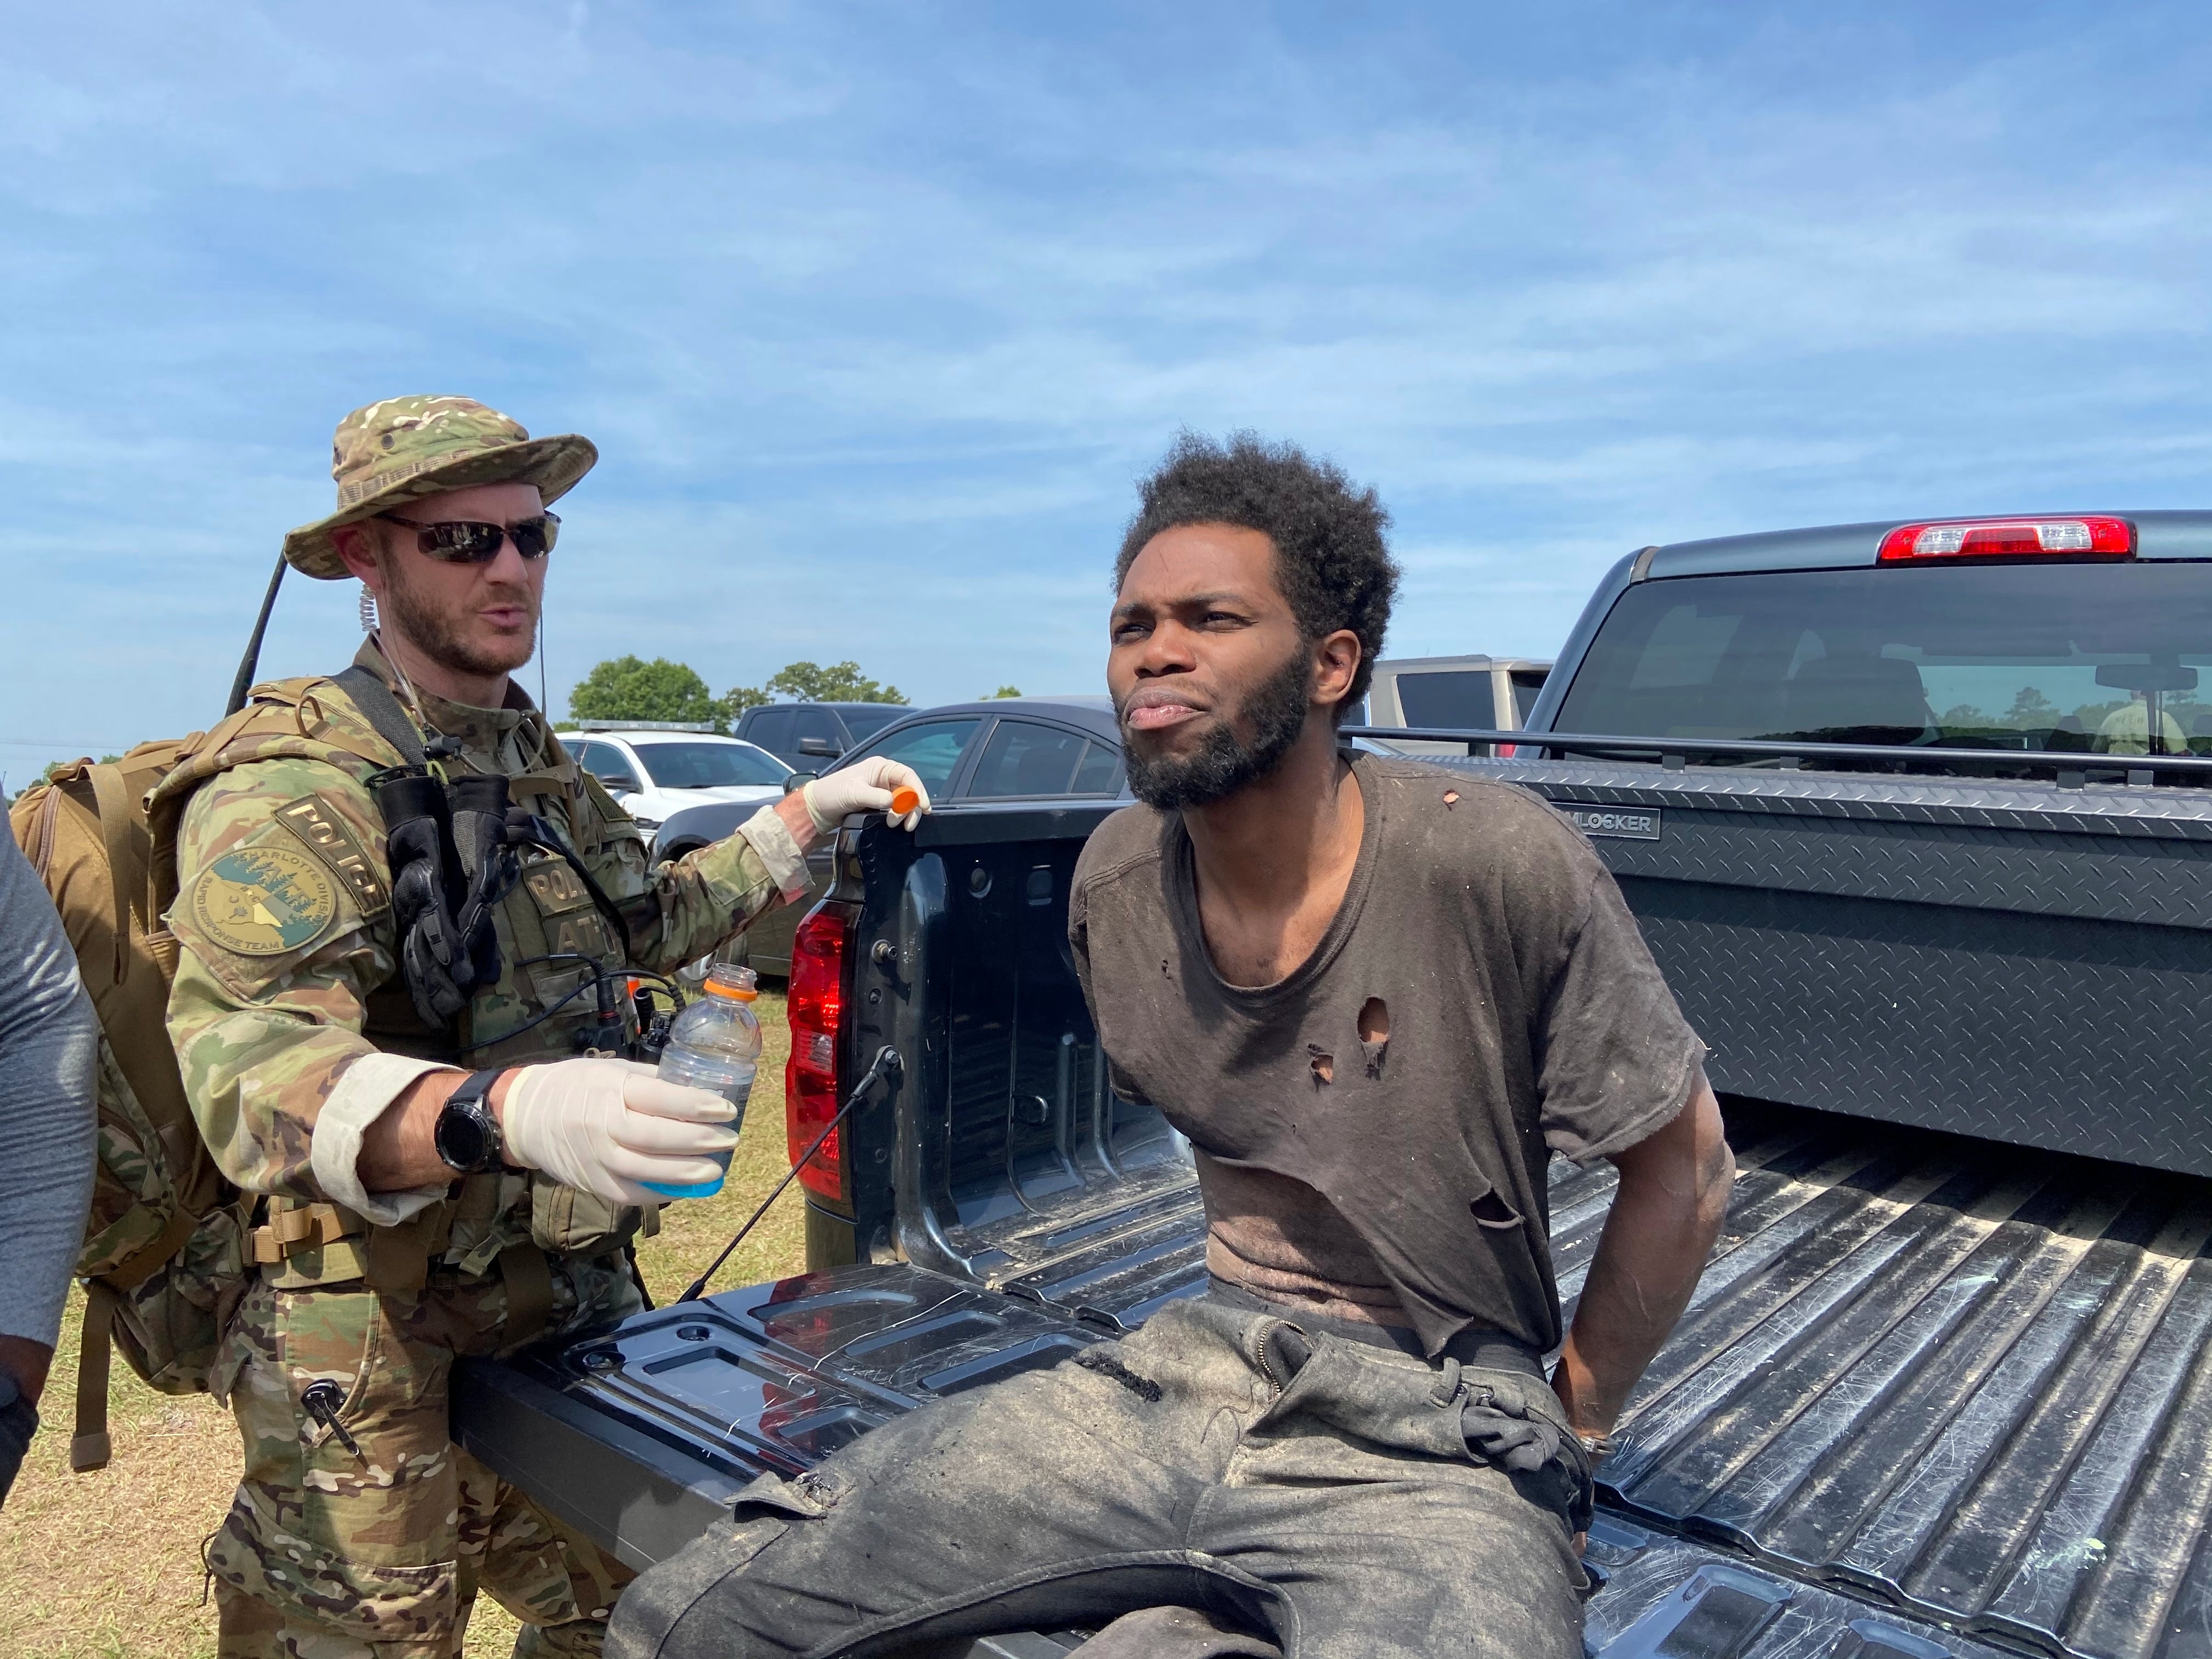 Tyler Terry is offered water during his arrest in South Carolina on Monday, May 24, 2021.